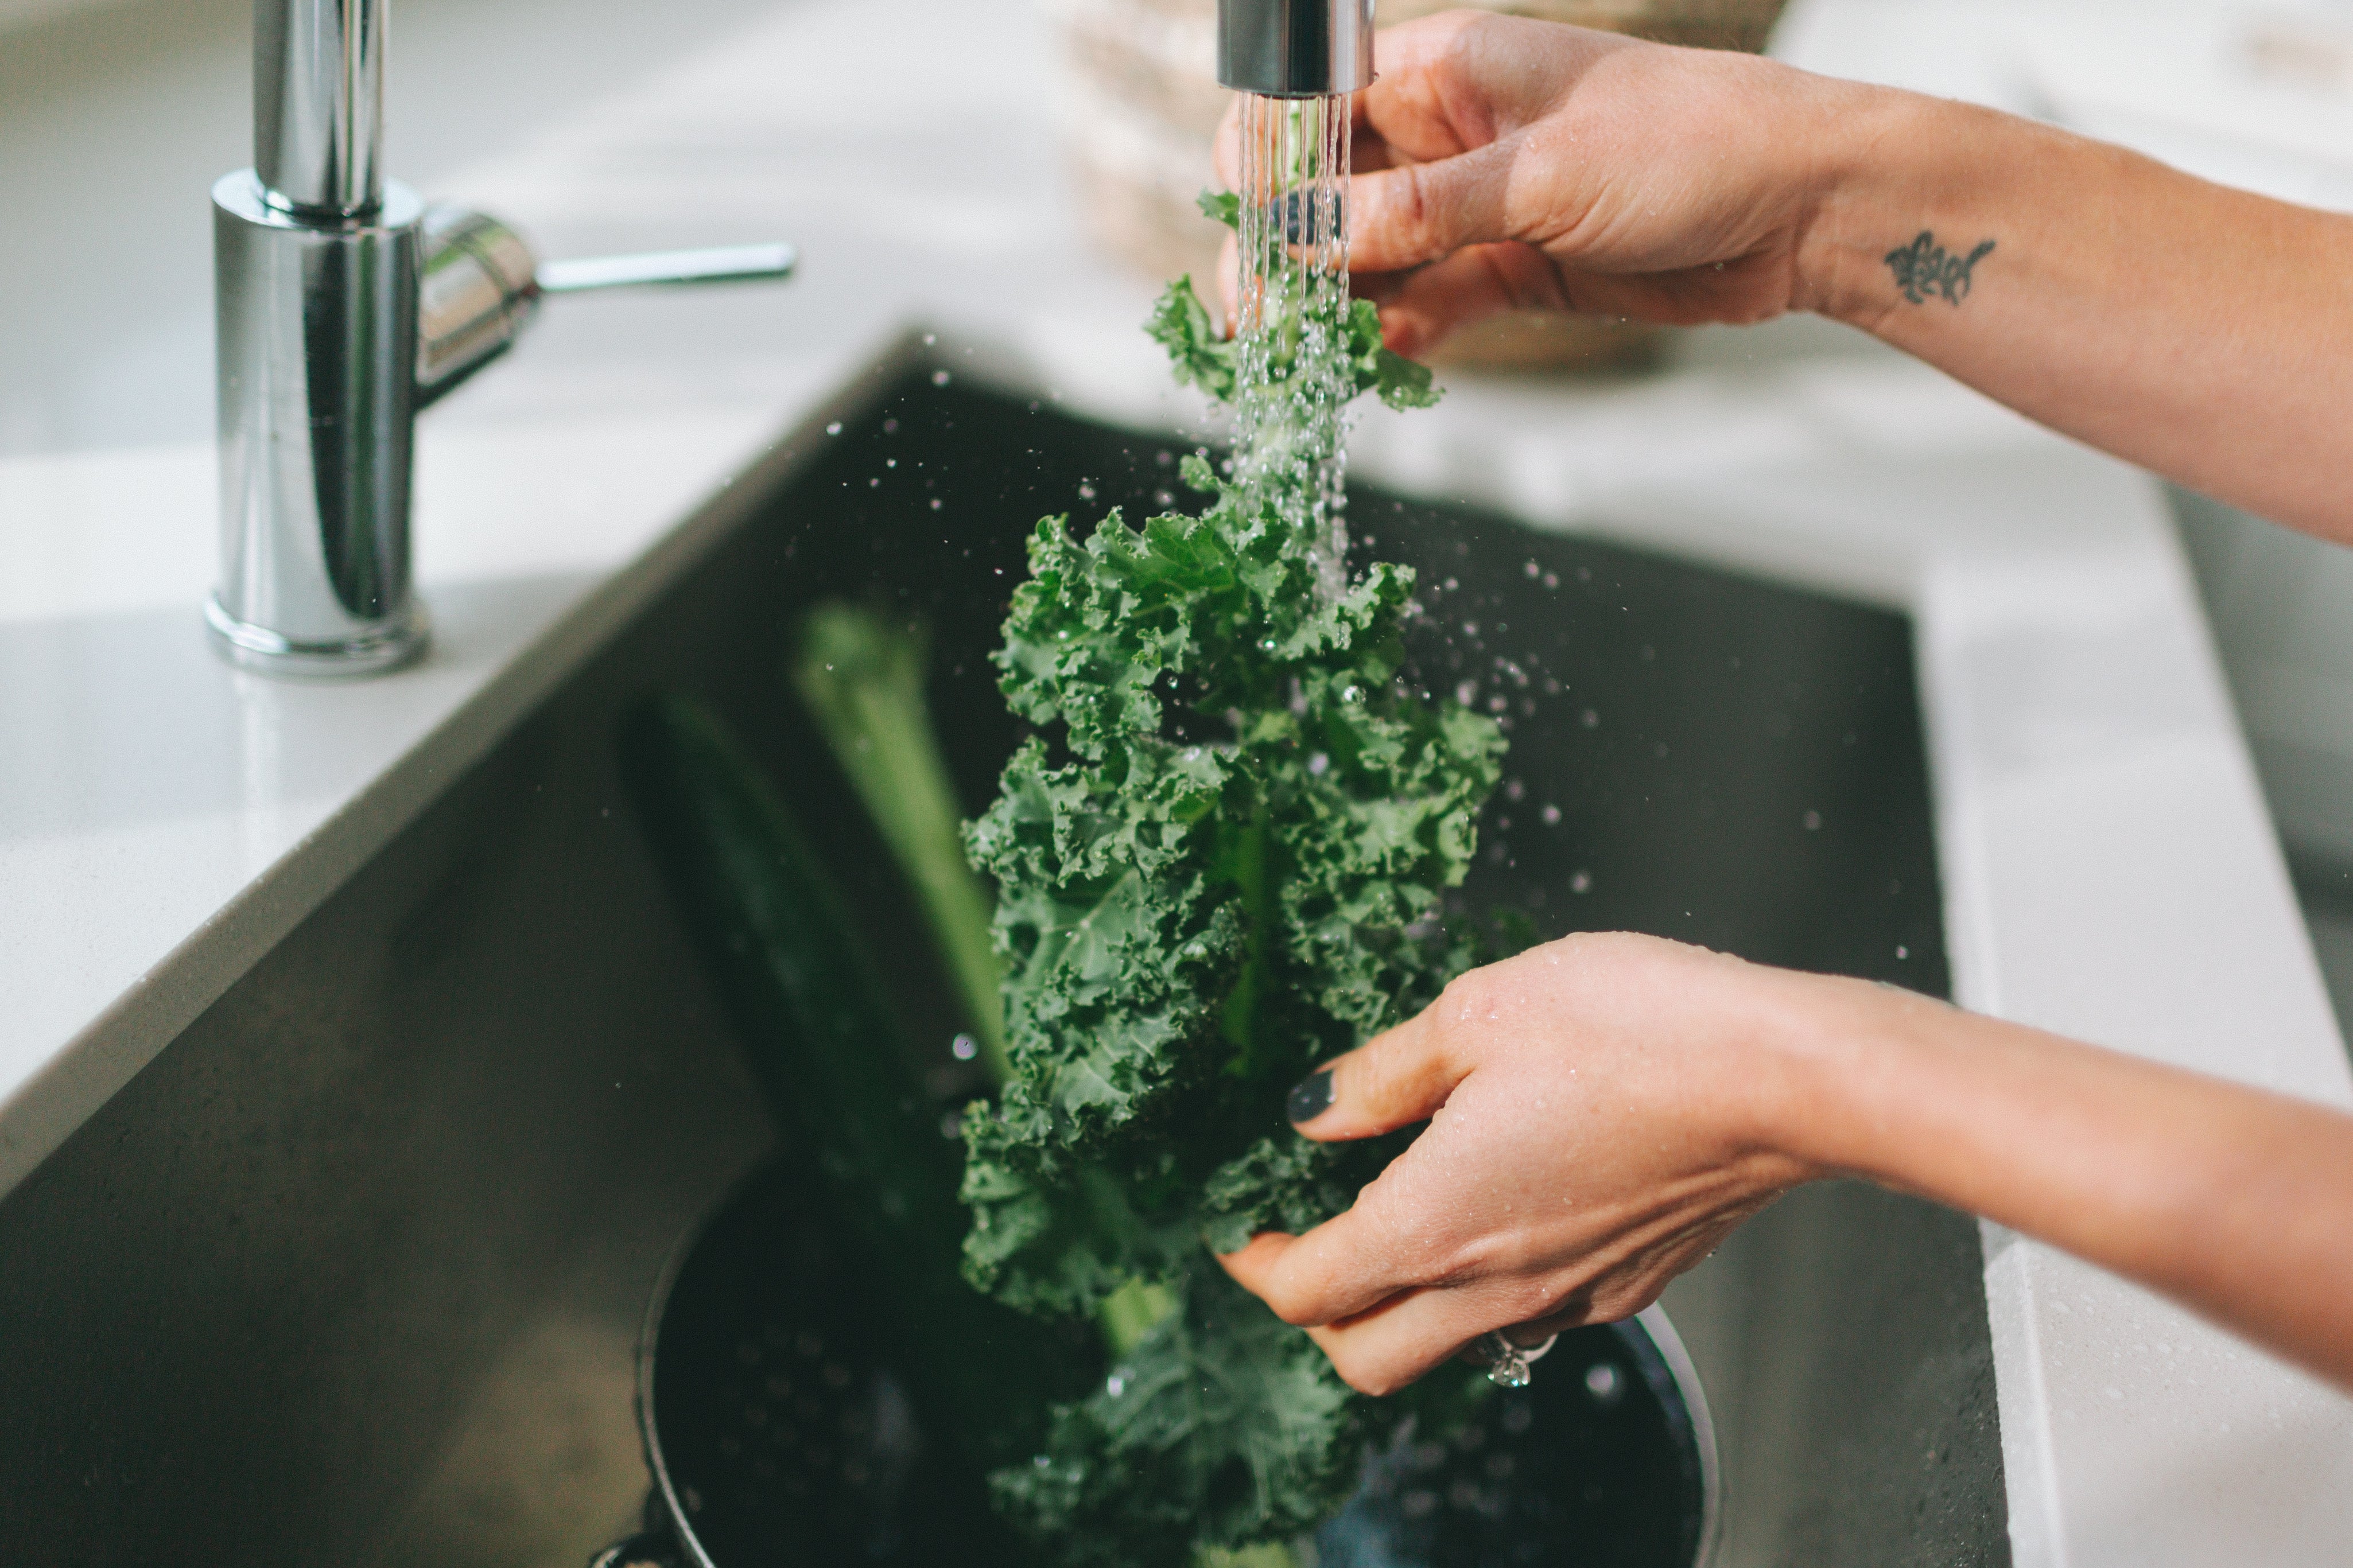 a-womans-hands-washing-kale-in-the-kitchen-sink_t20_wQ2k6K - The Goodfor Company